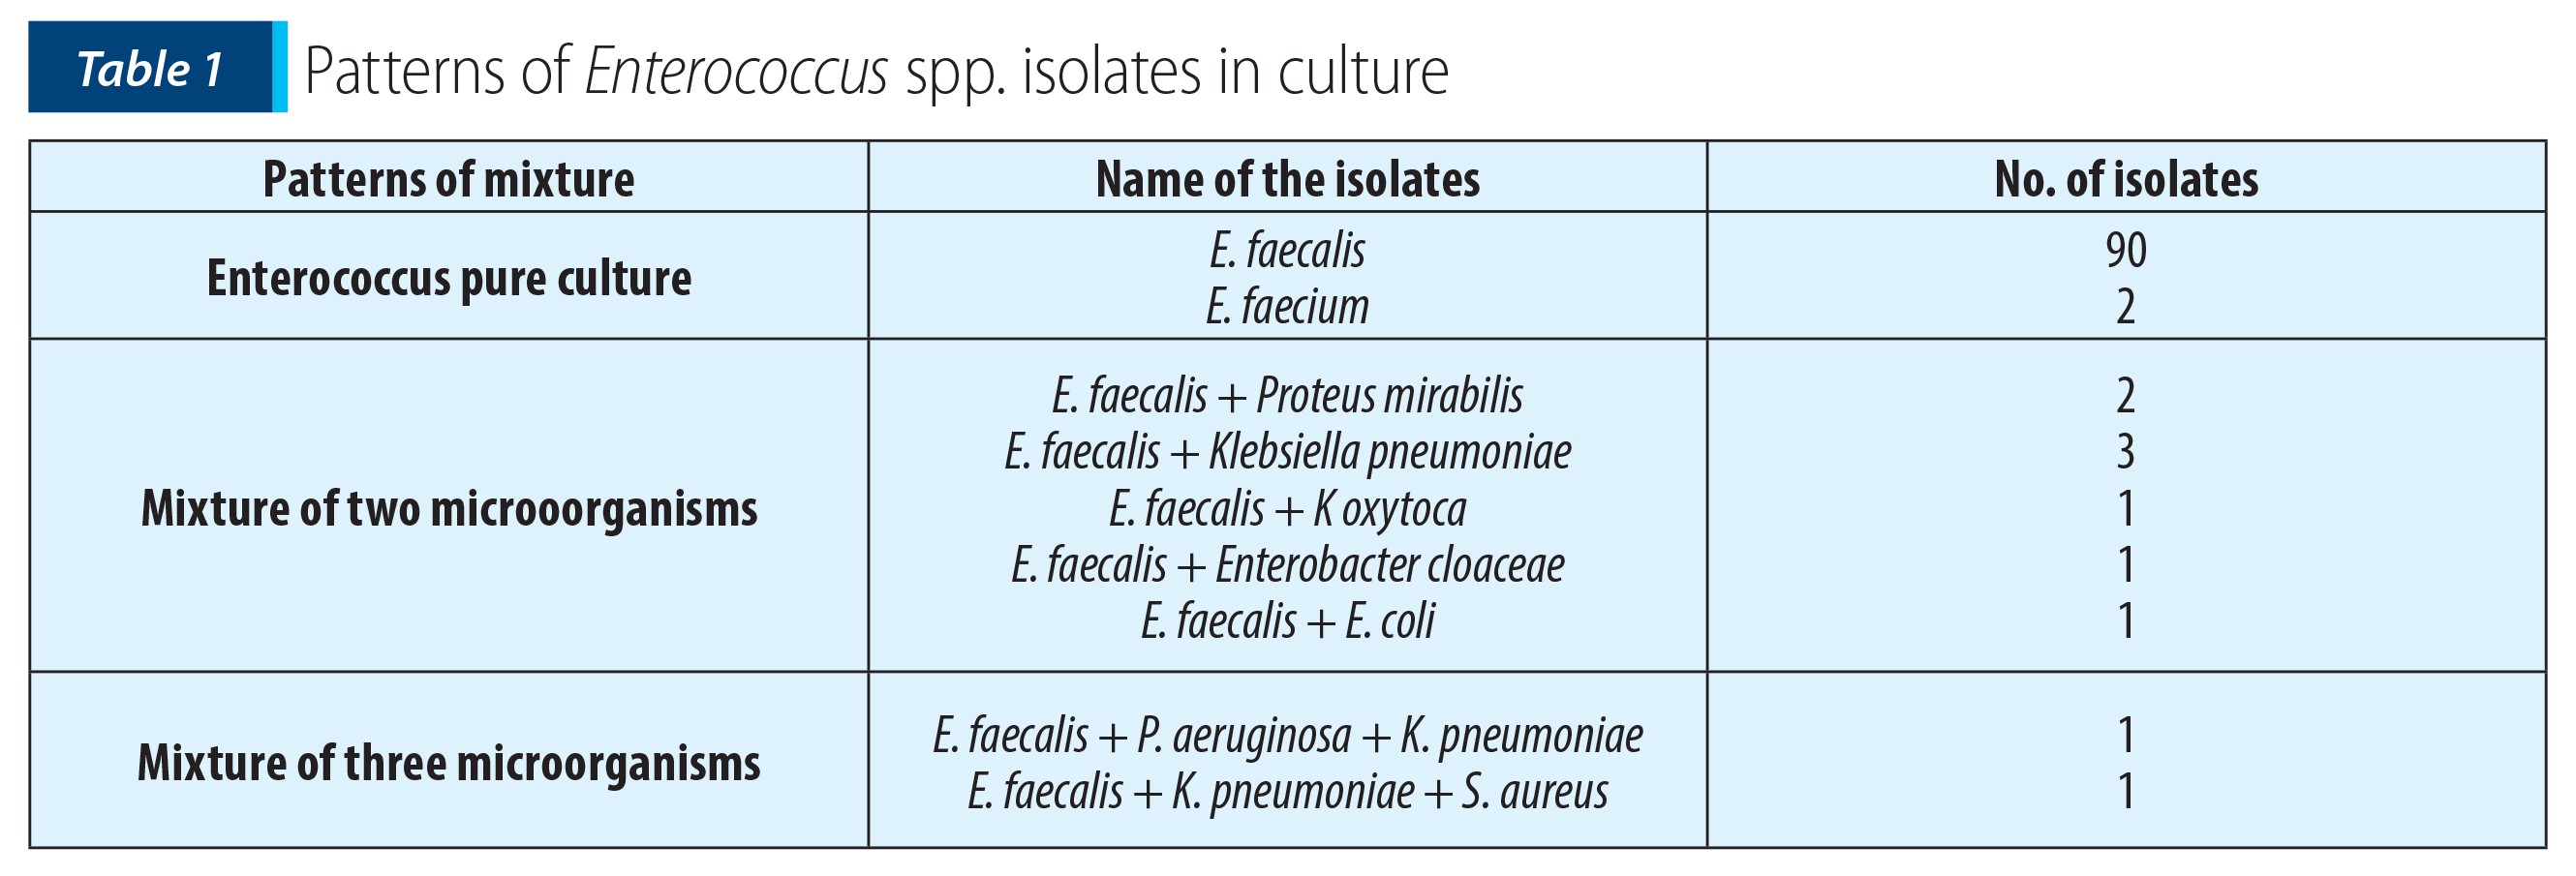 Table 1; Patterns of Enterococcus spp. isolates in culture